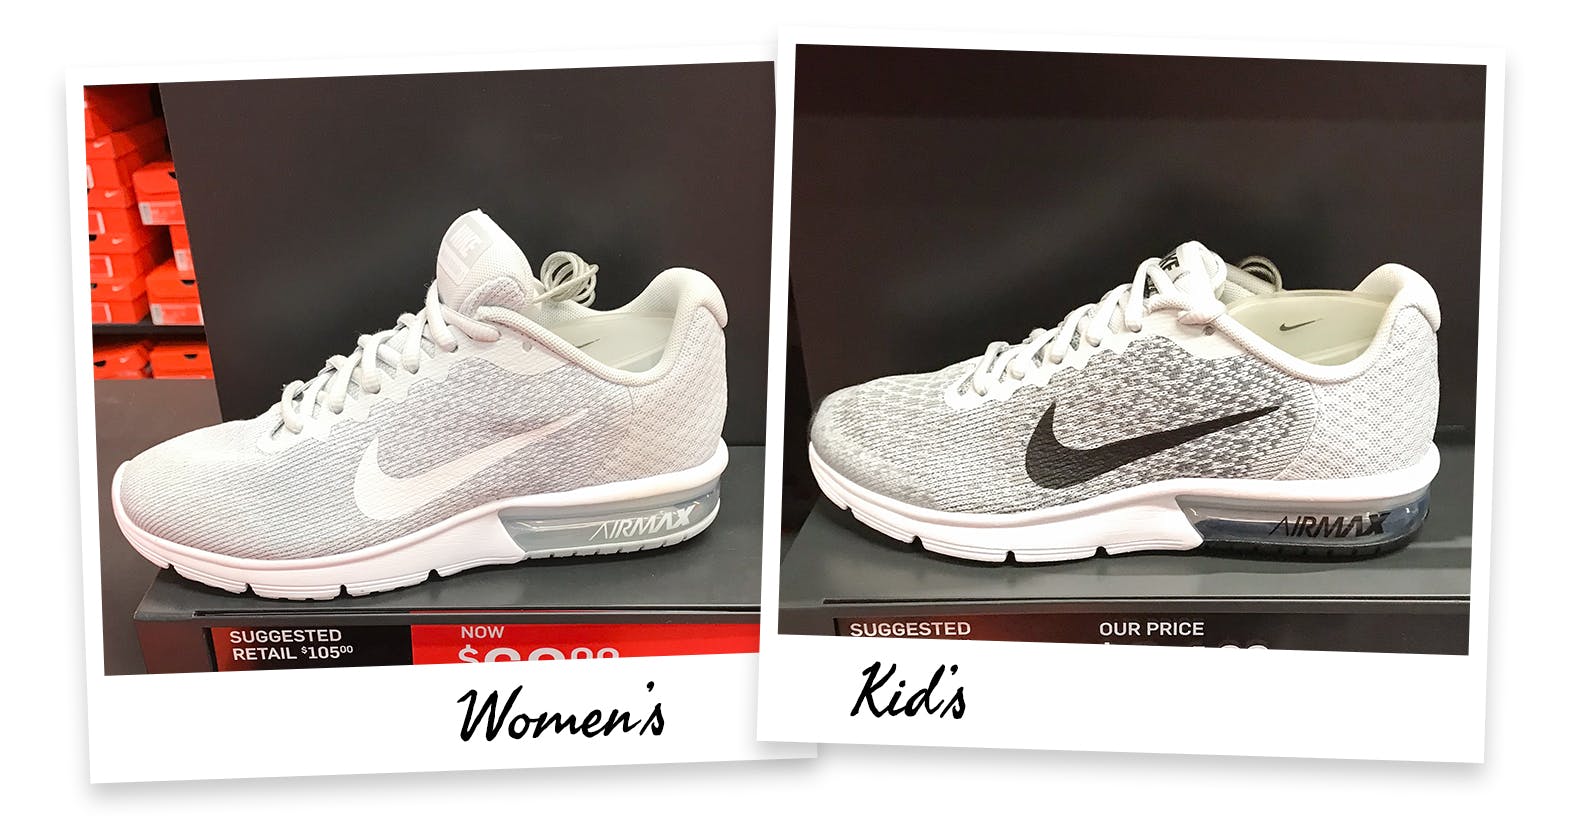 nike womens and kids sizes comparison